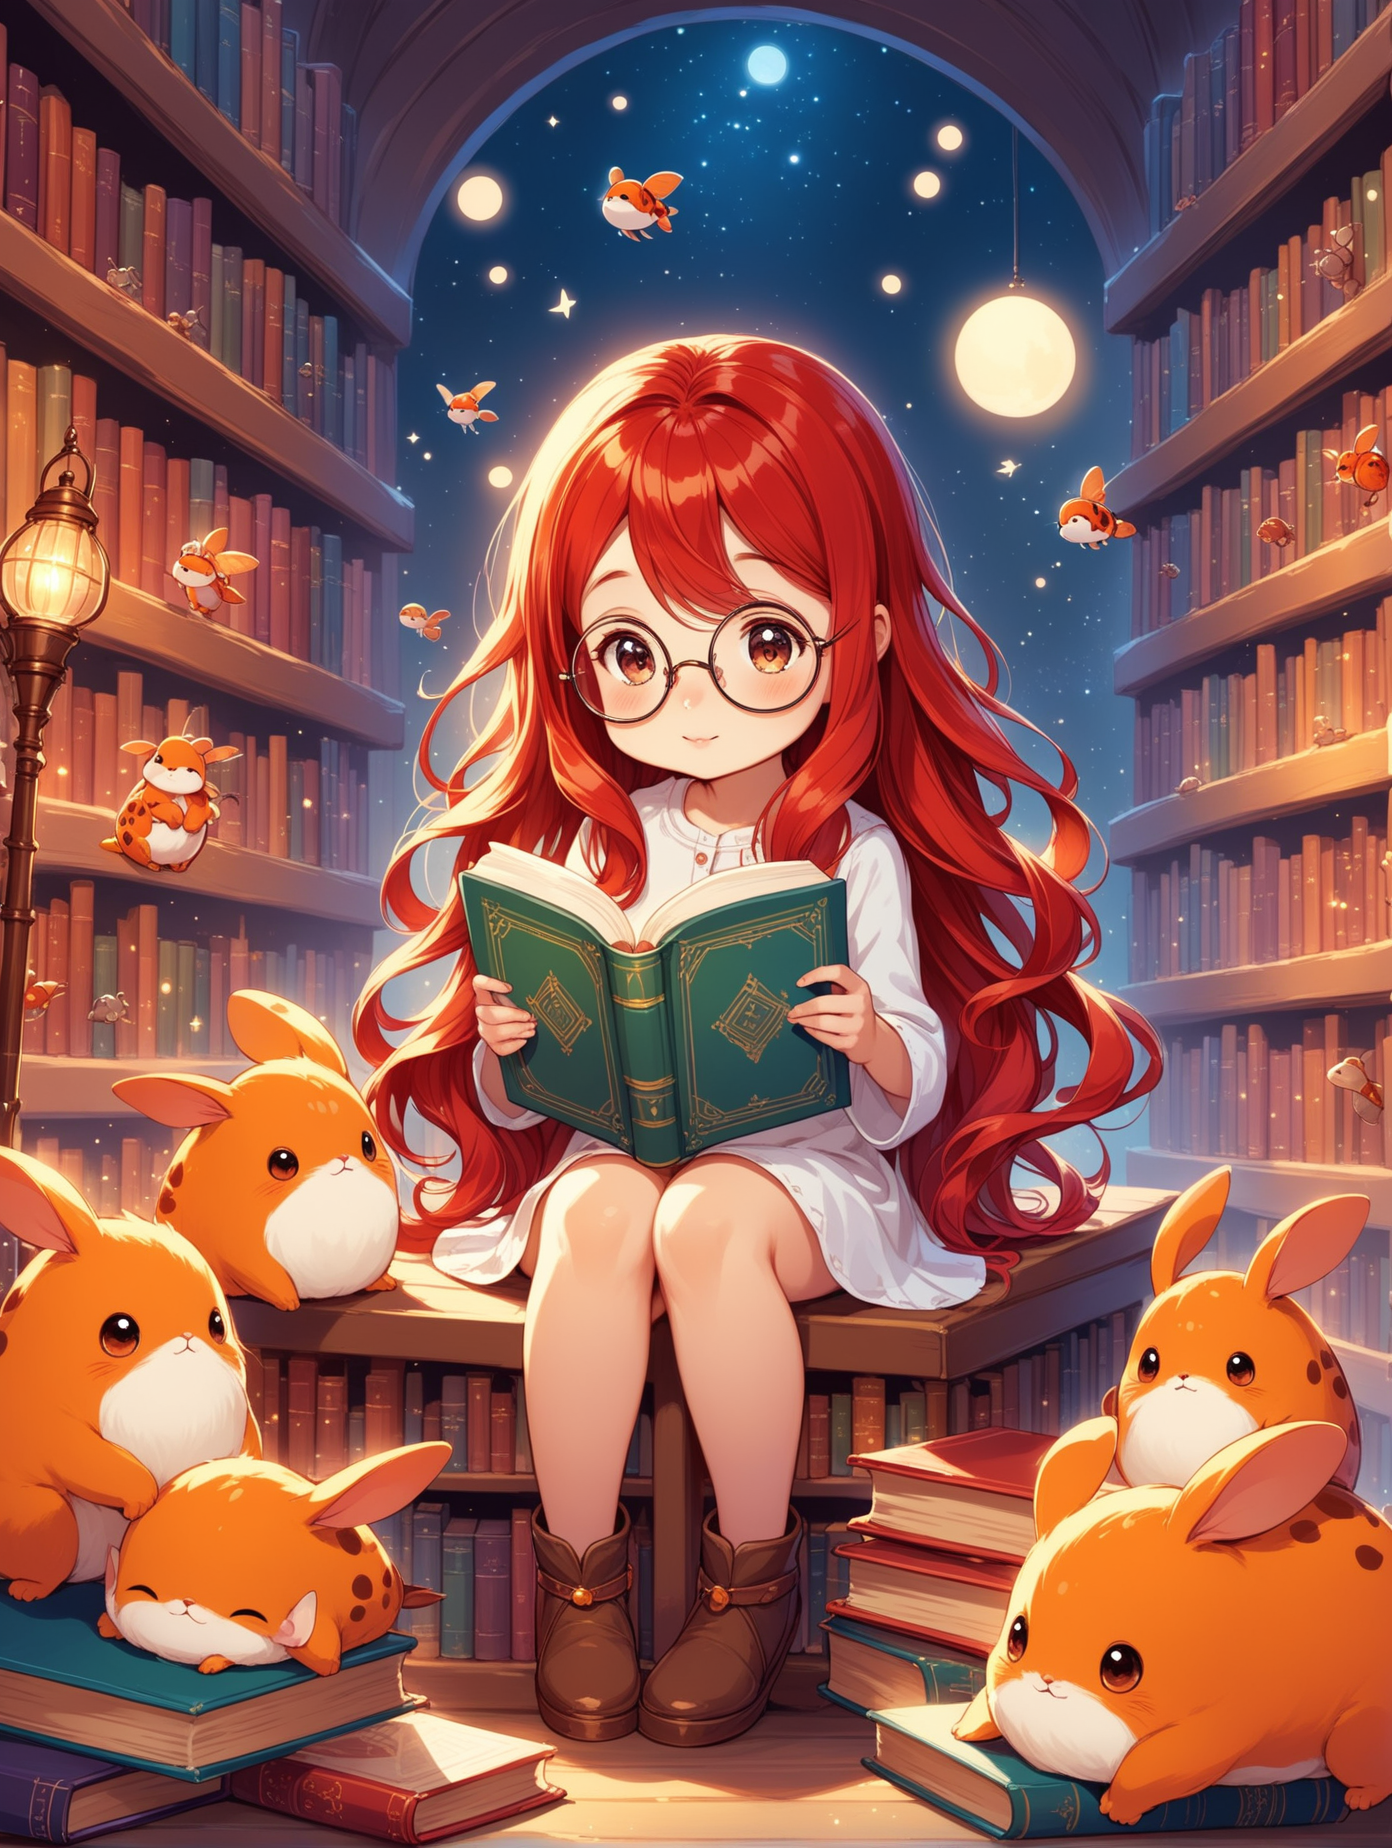 a cute little cartoon girl wearing big round glasses, red long curled hair, surrounded by little creatures, reading a book, and sitting on different books in a fantasy library